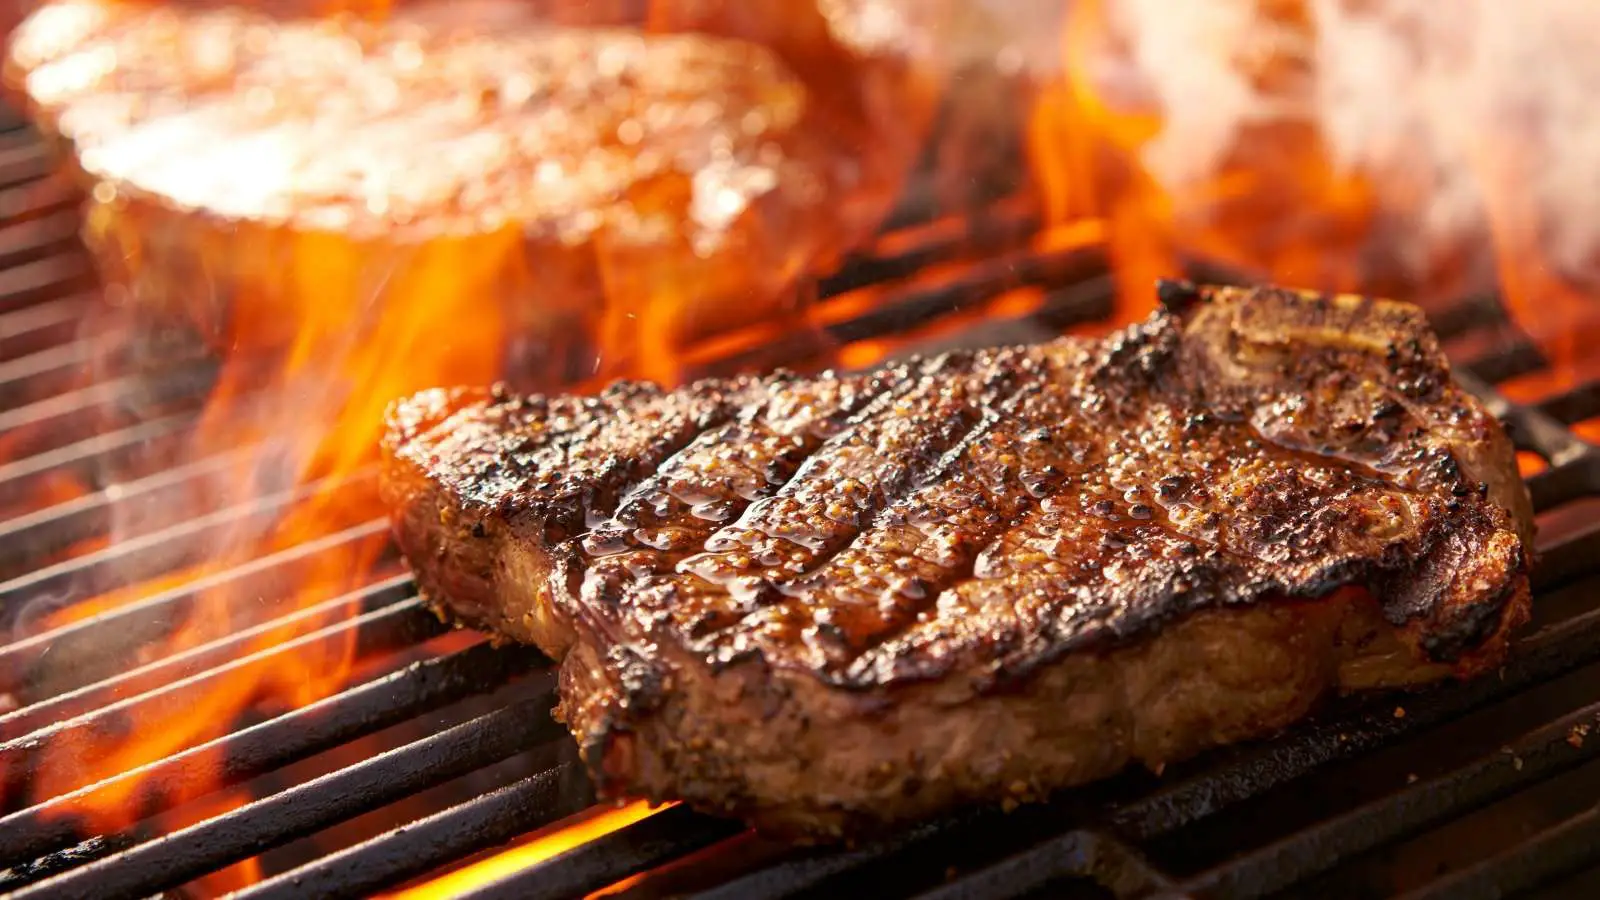 This is the worst cut of steak to grill